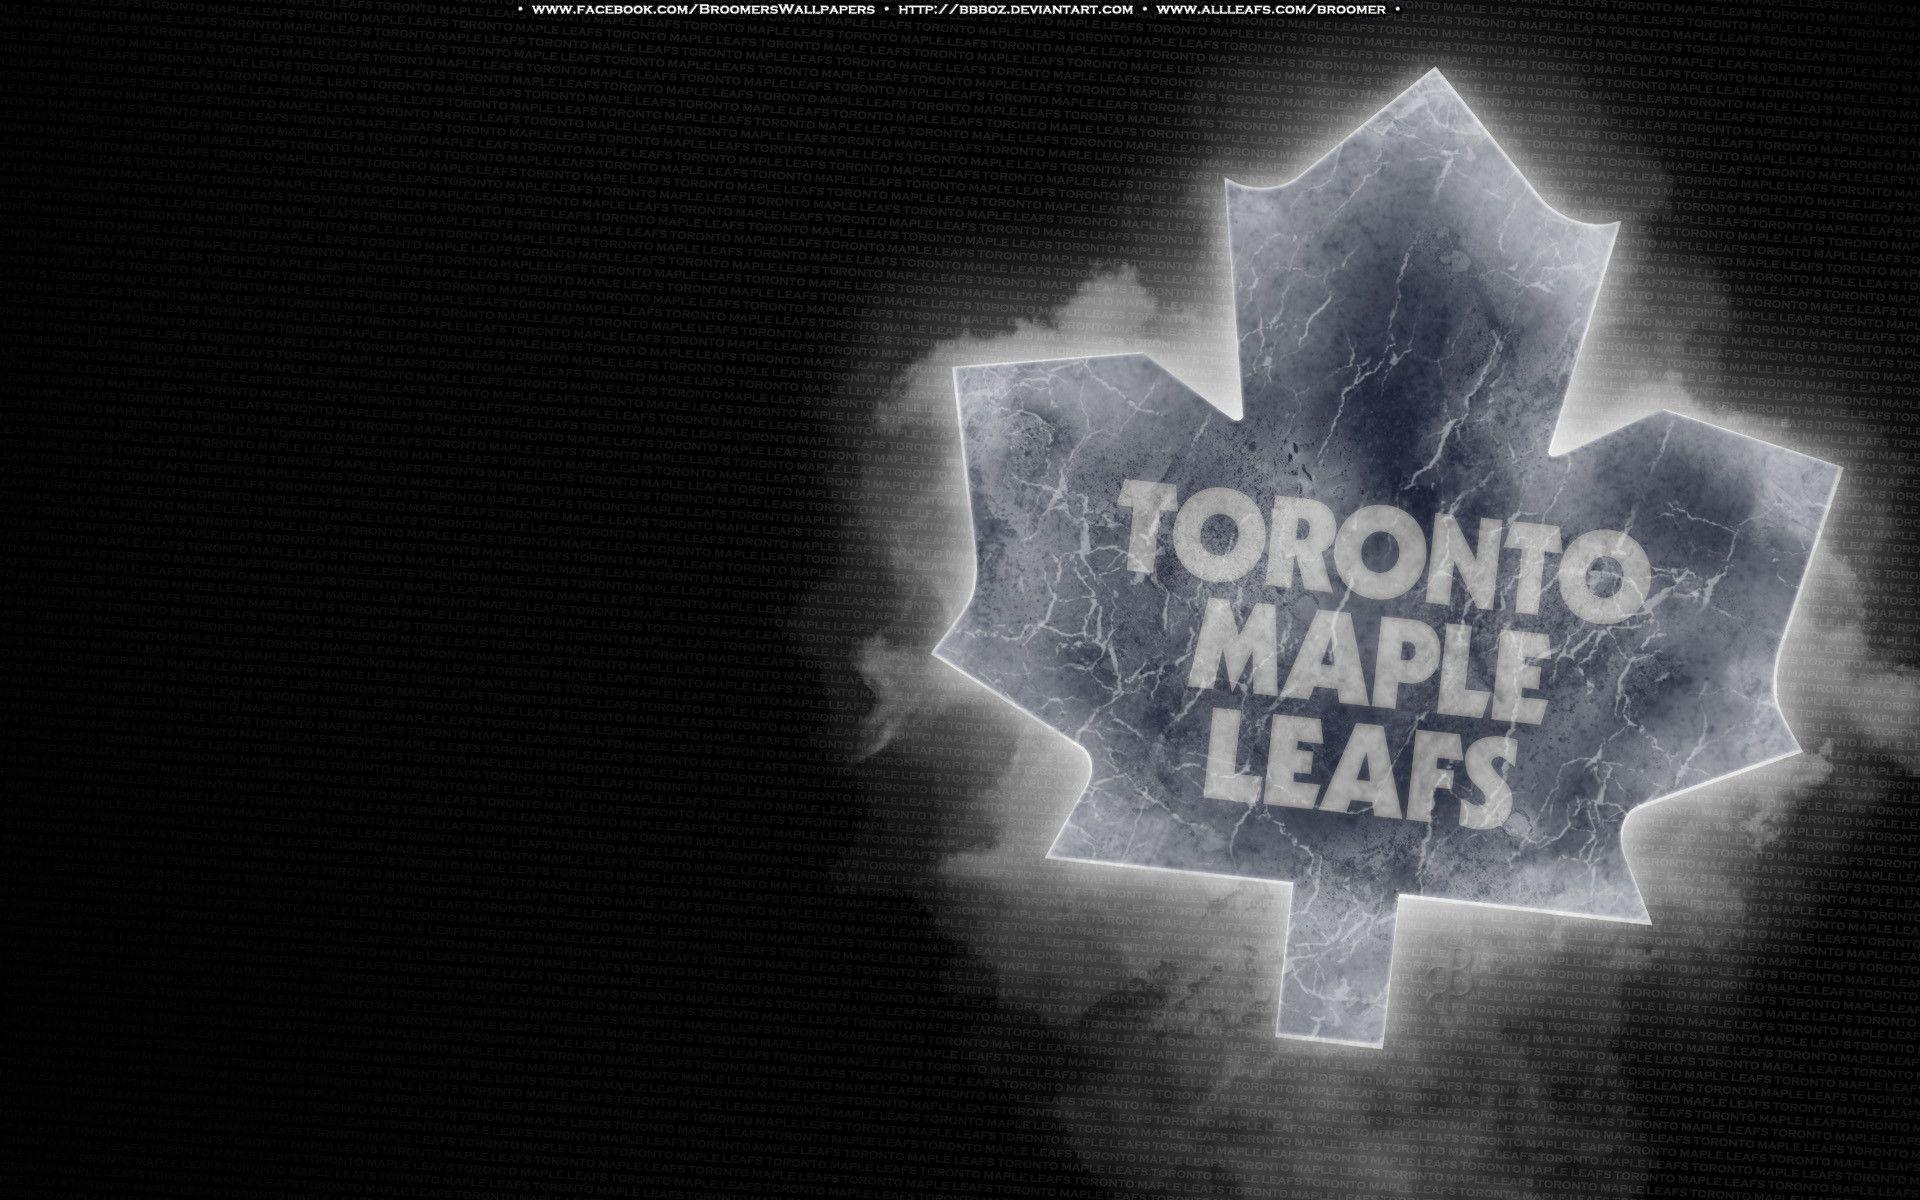 Broomers Wallpaper! Lounge Maple Leafs